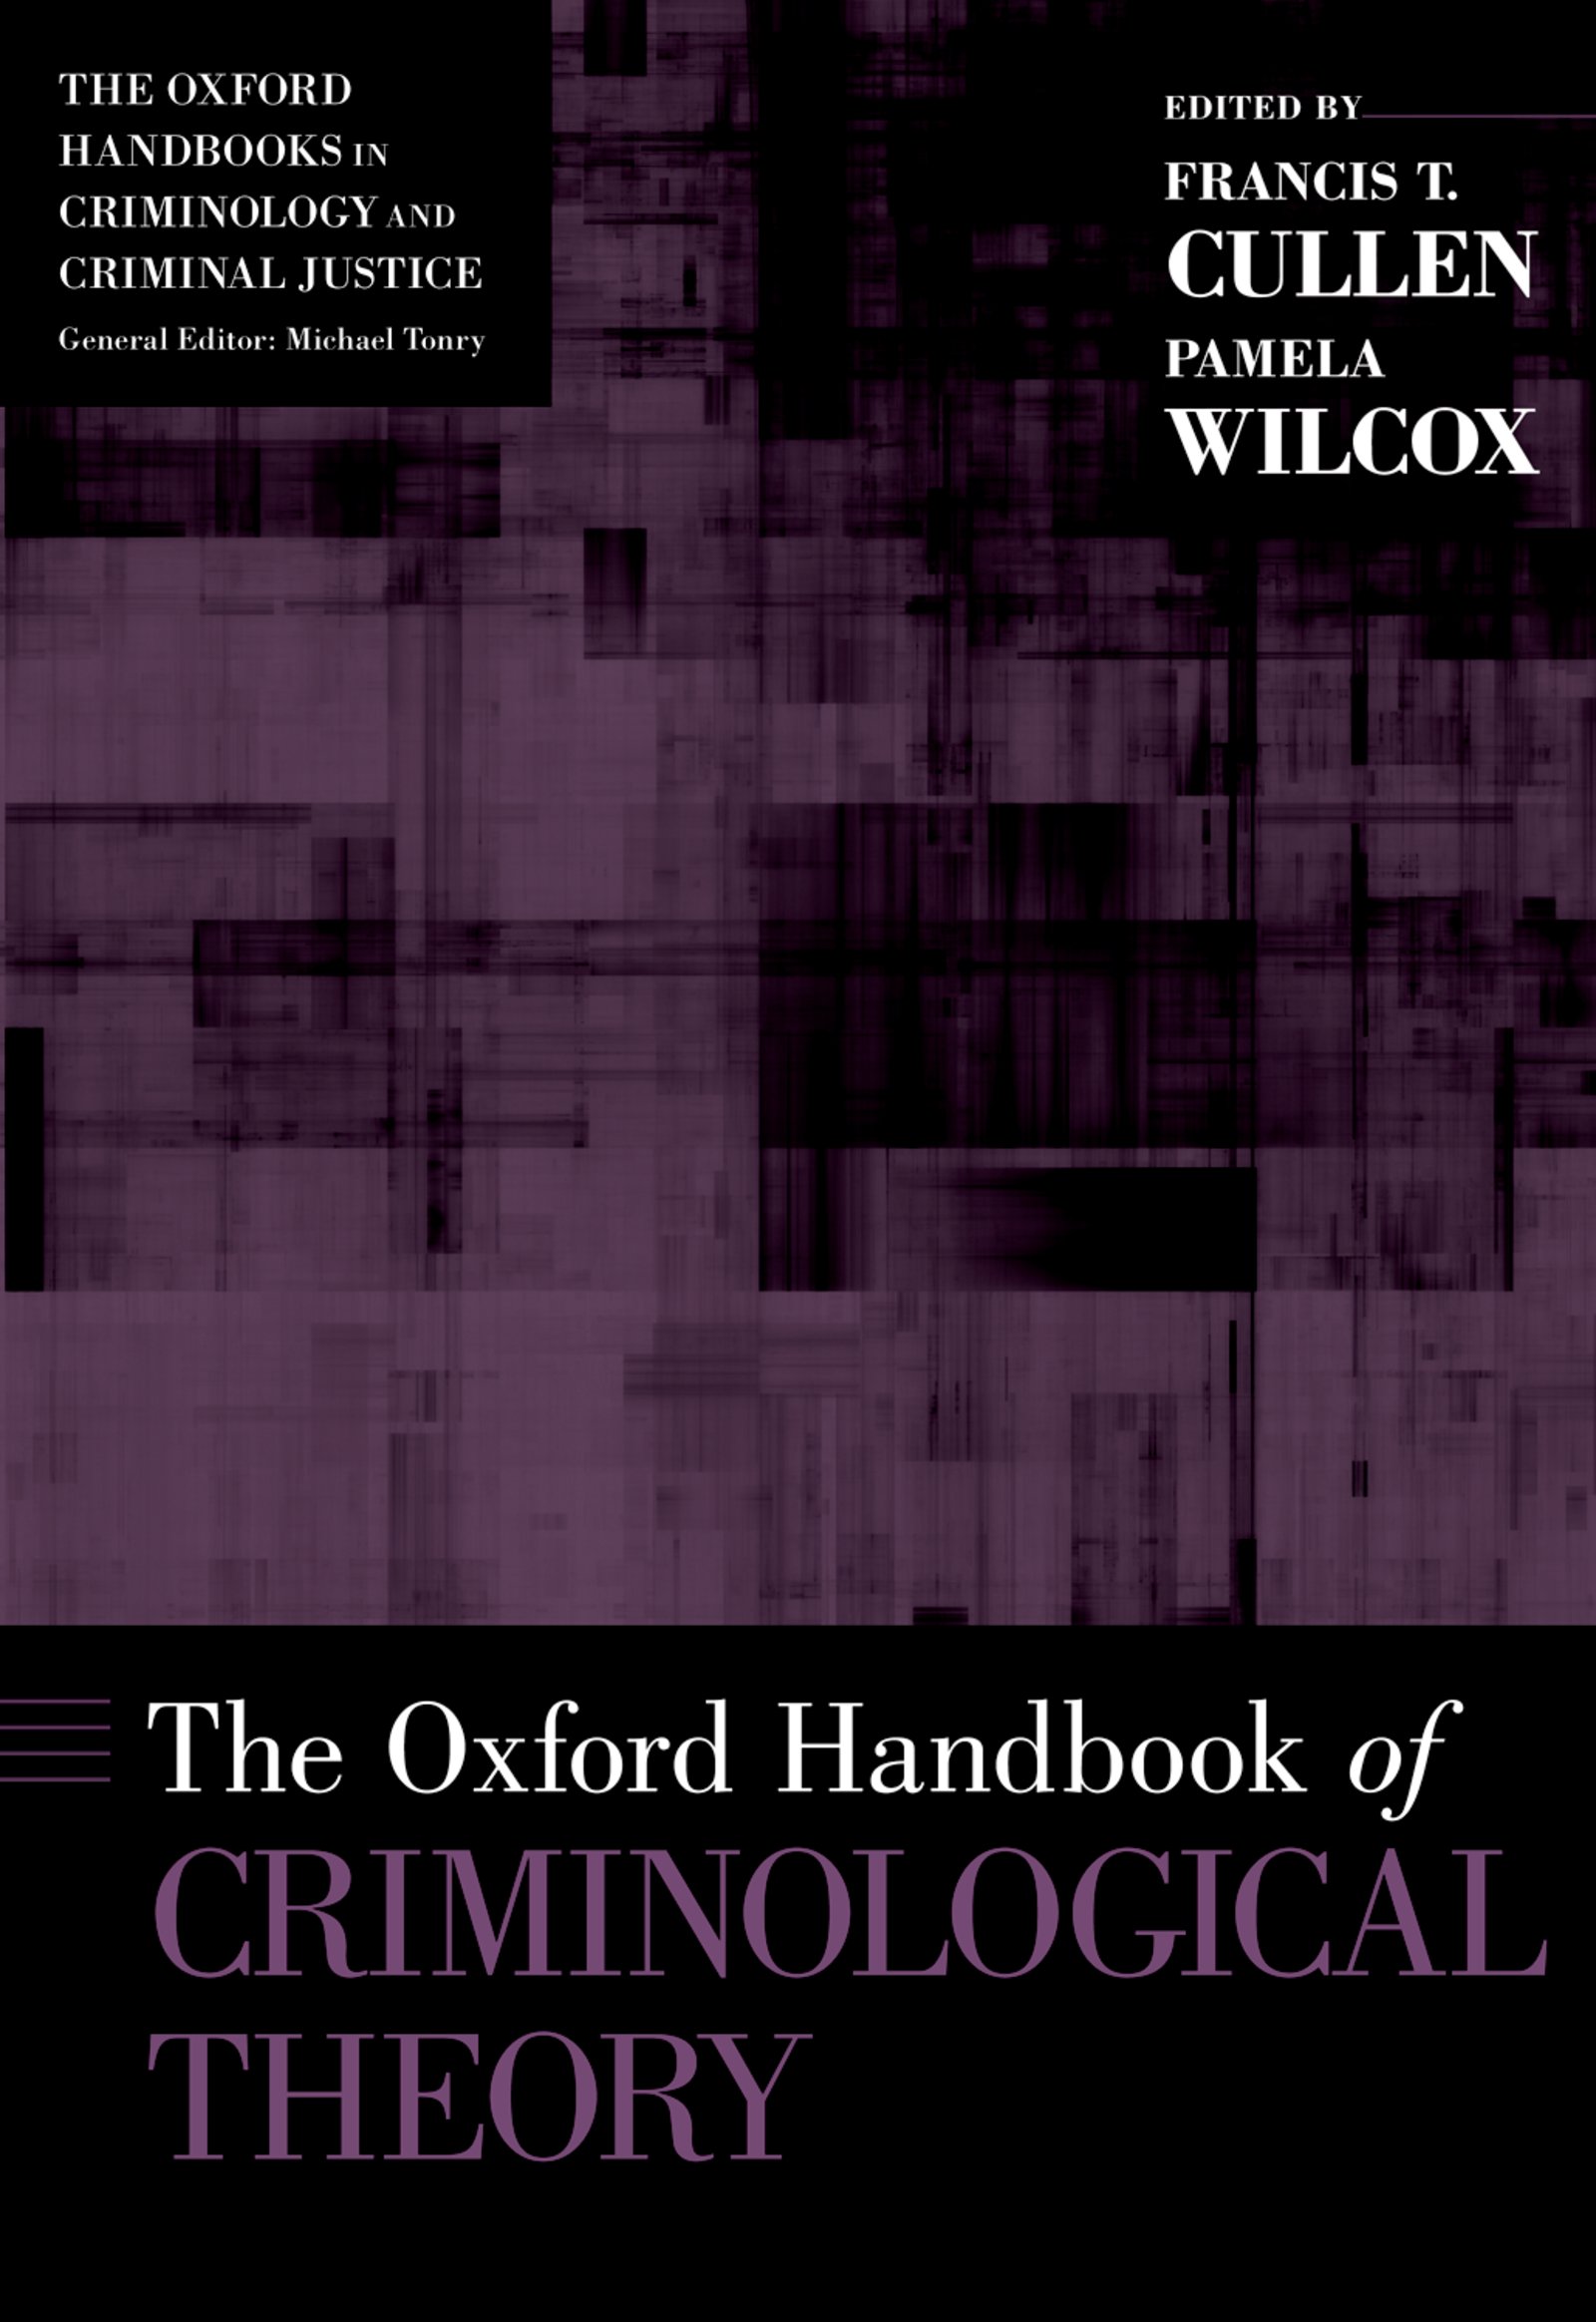 The Oxford Handbook of Criminological Theory - 50-99.99